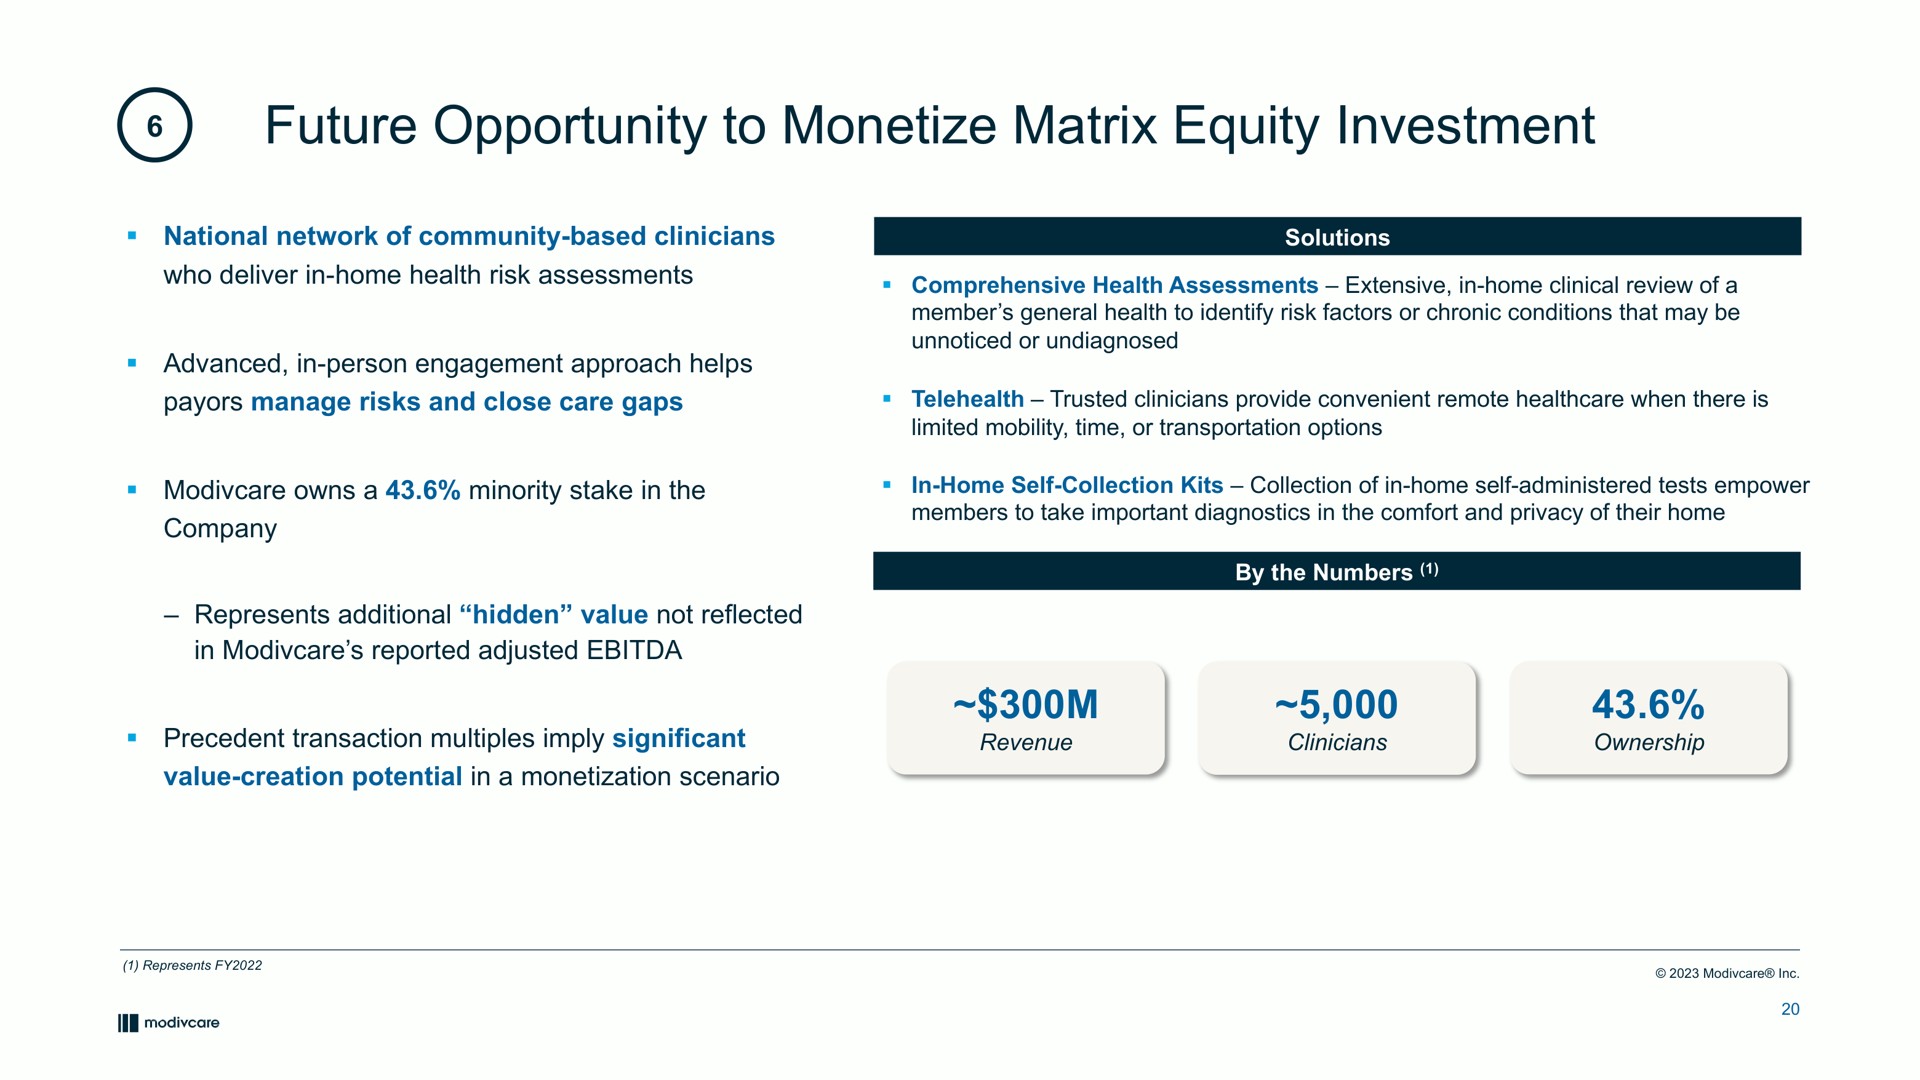 future opportunity to monetize matrix equity investment | ModivCare